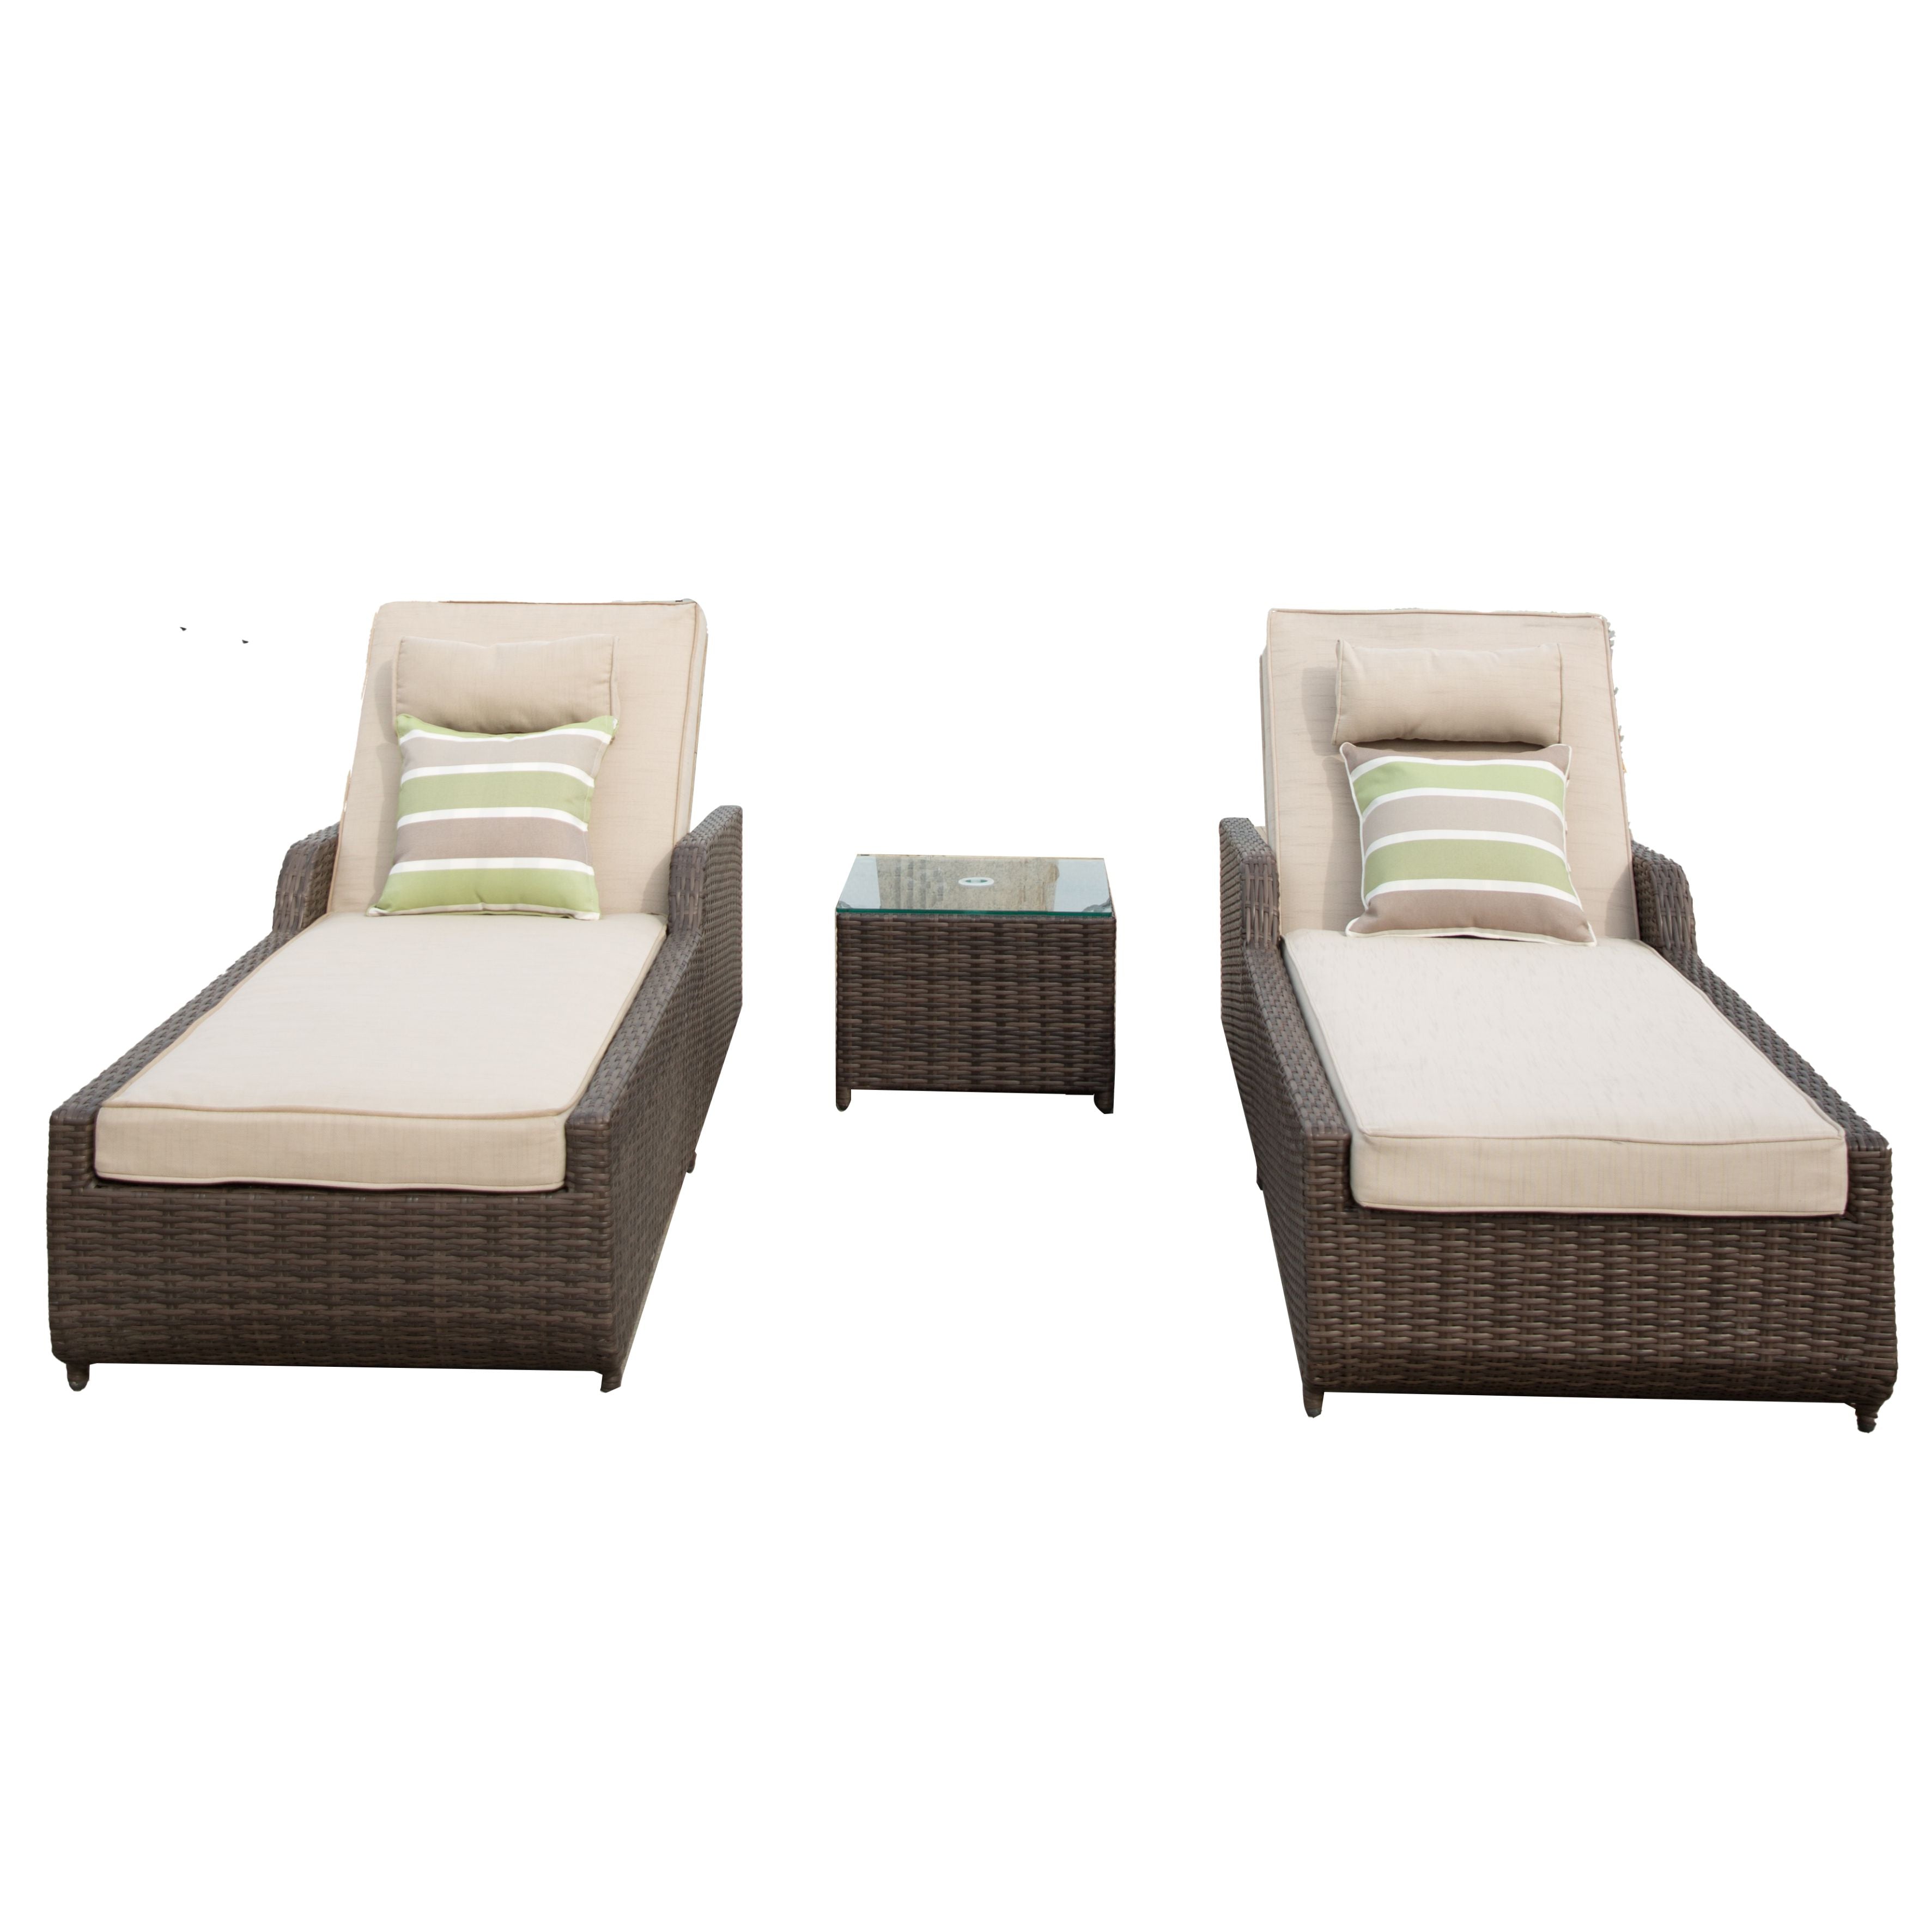 One set of aluminum rattan bed = 2 beds + 1 coffee table